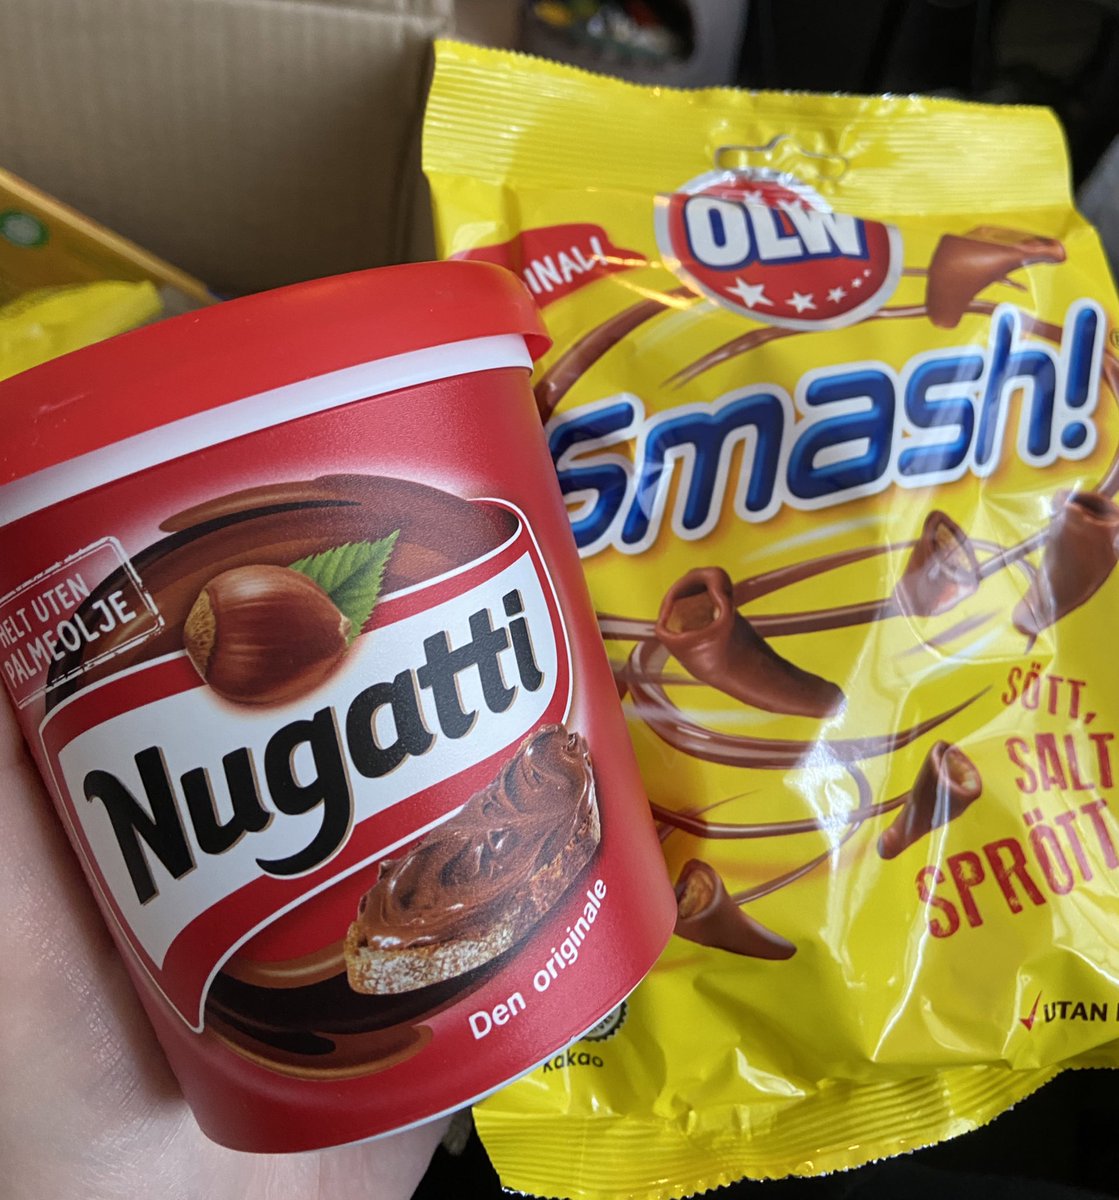 My ScandiKitchen order arrived and the norsk side of me could not be happier. If you’ve not had Nugatti before, think Nutella, but BETTER. And, no palm oil (like it says on the front - helt uten palmeolje!) Smash are like those Bugles crisps, but covered in chocolate. 😍